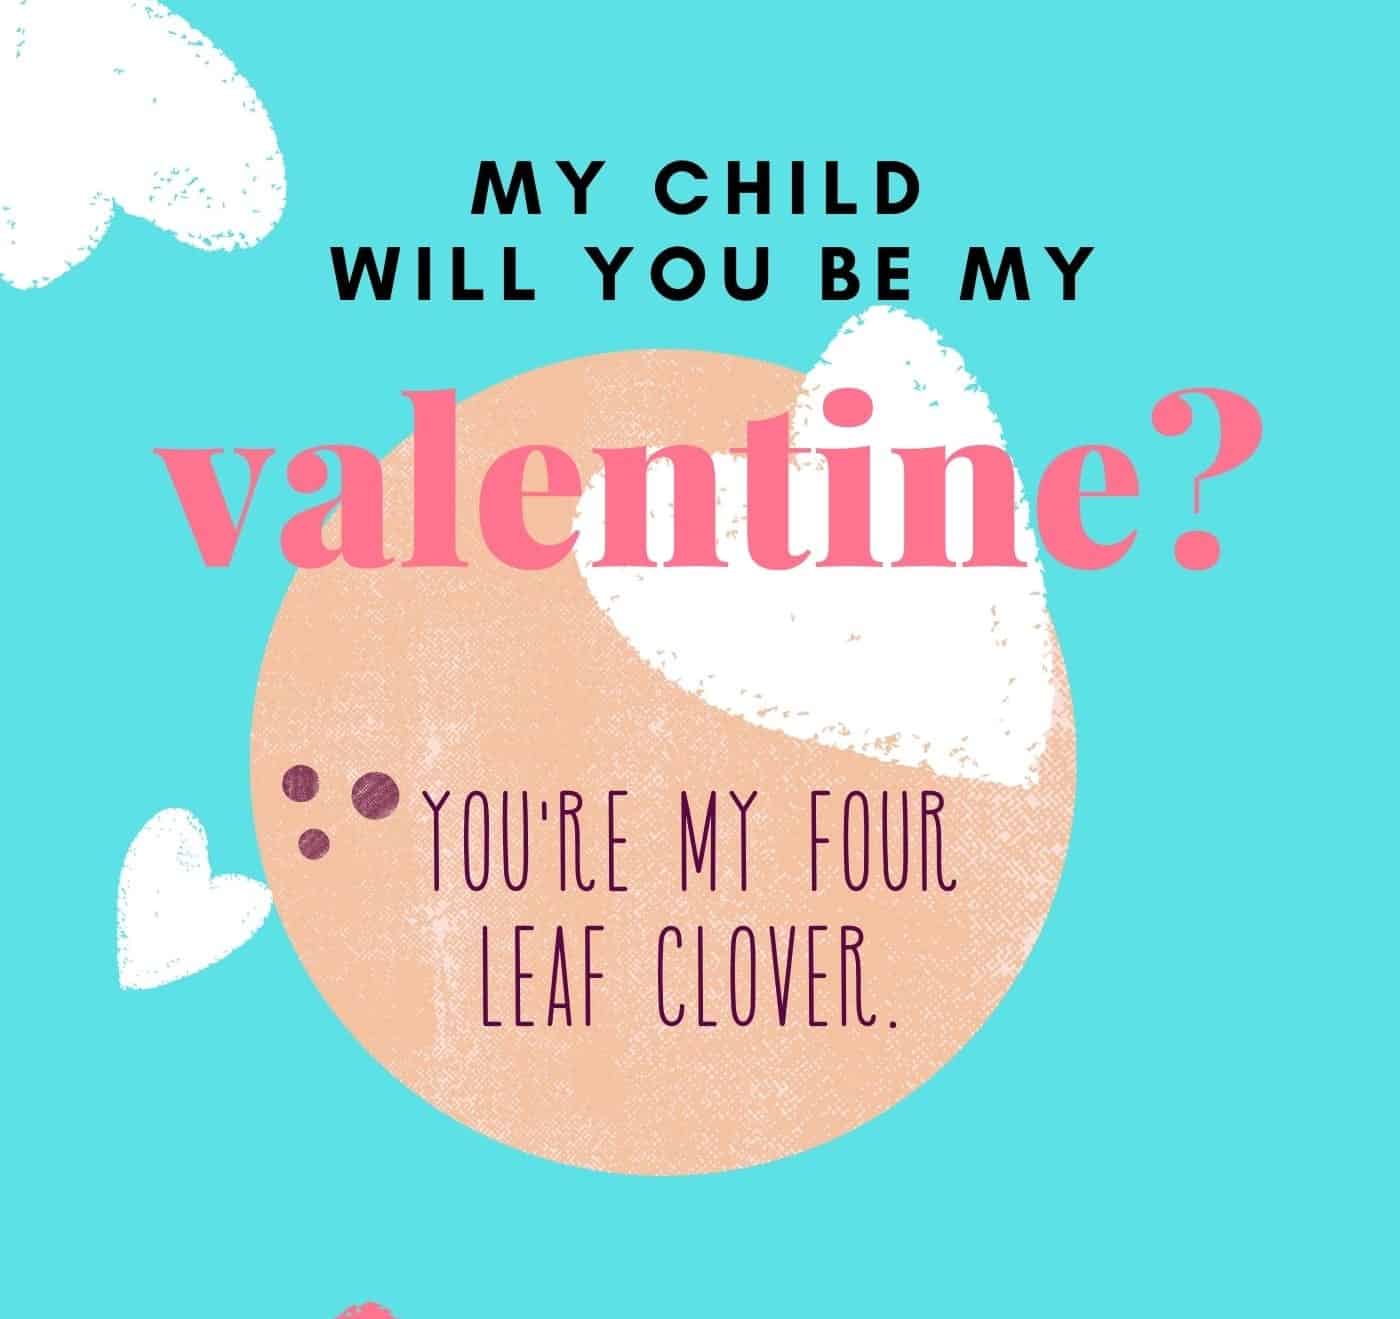 Is it Wise to Make your Child your Valentine? Find Free Advice Here